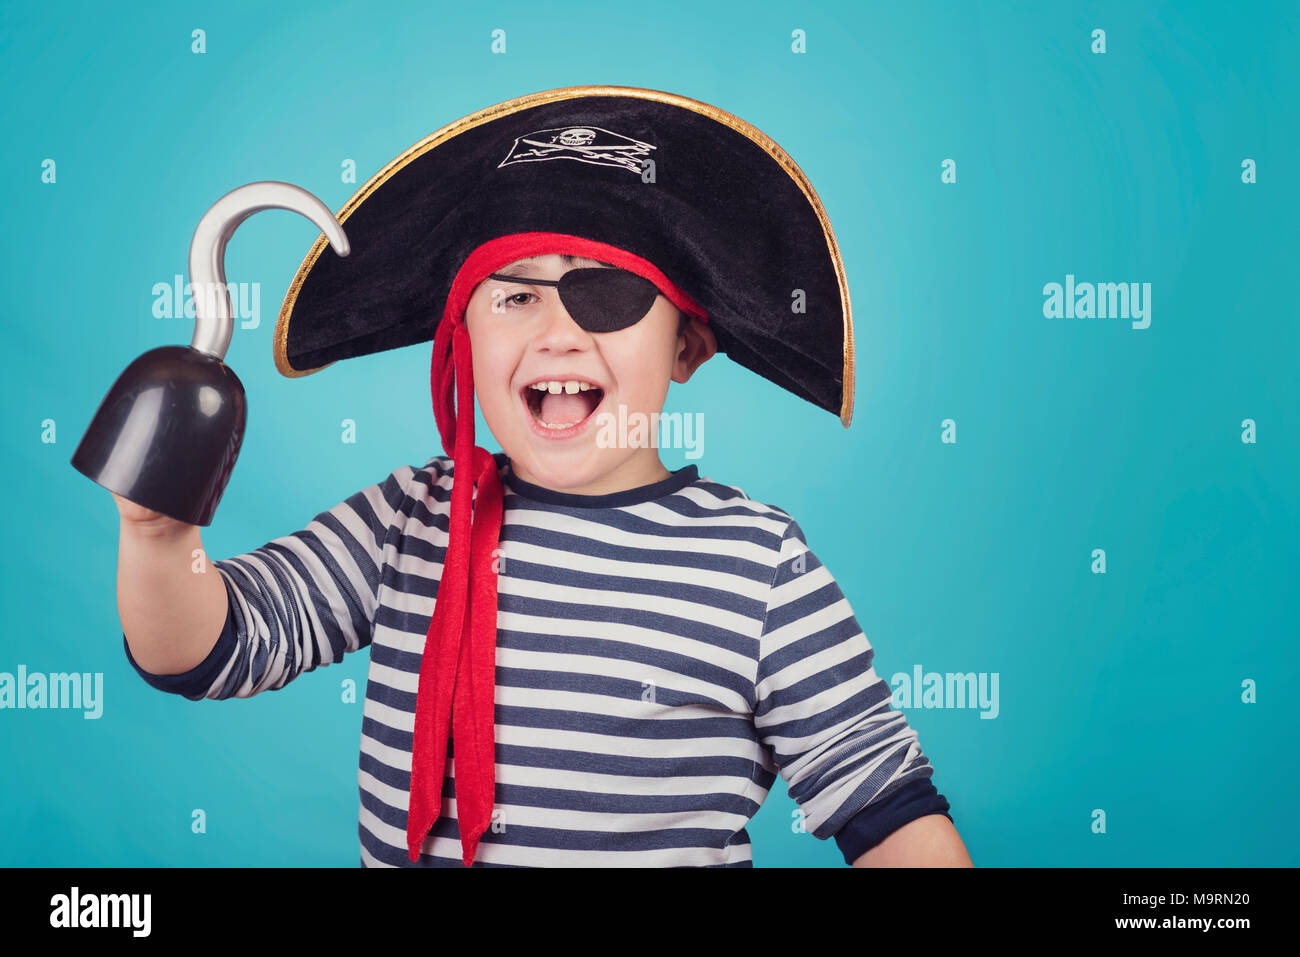 smiling boy dressed as a pirate on blue background Stock Photo